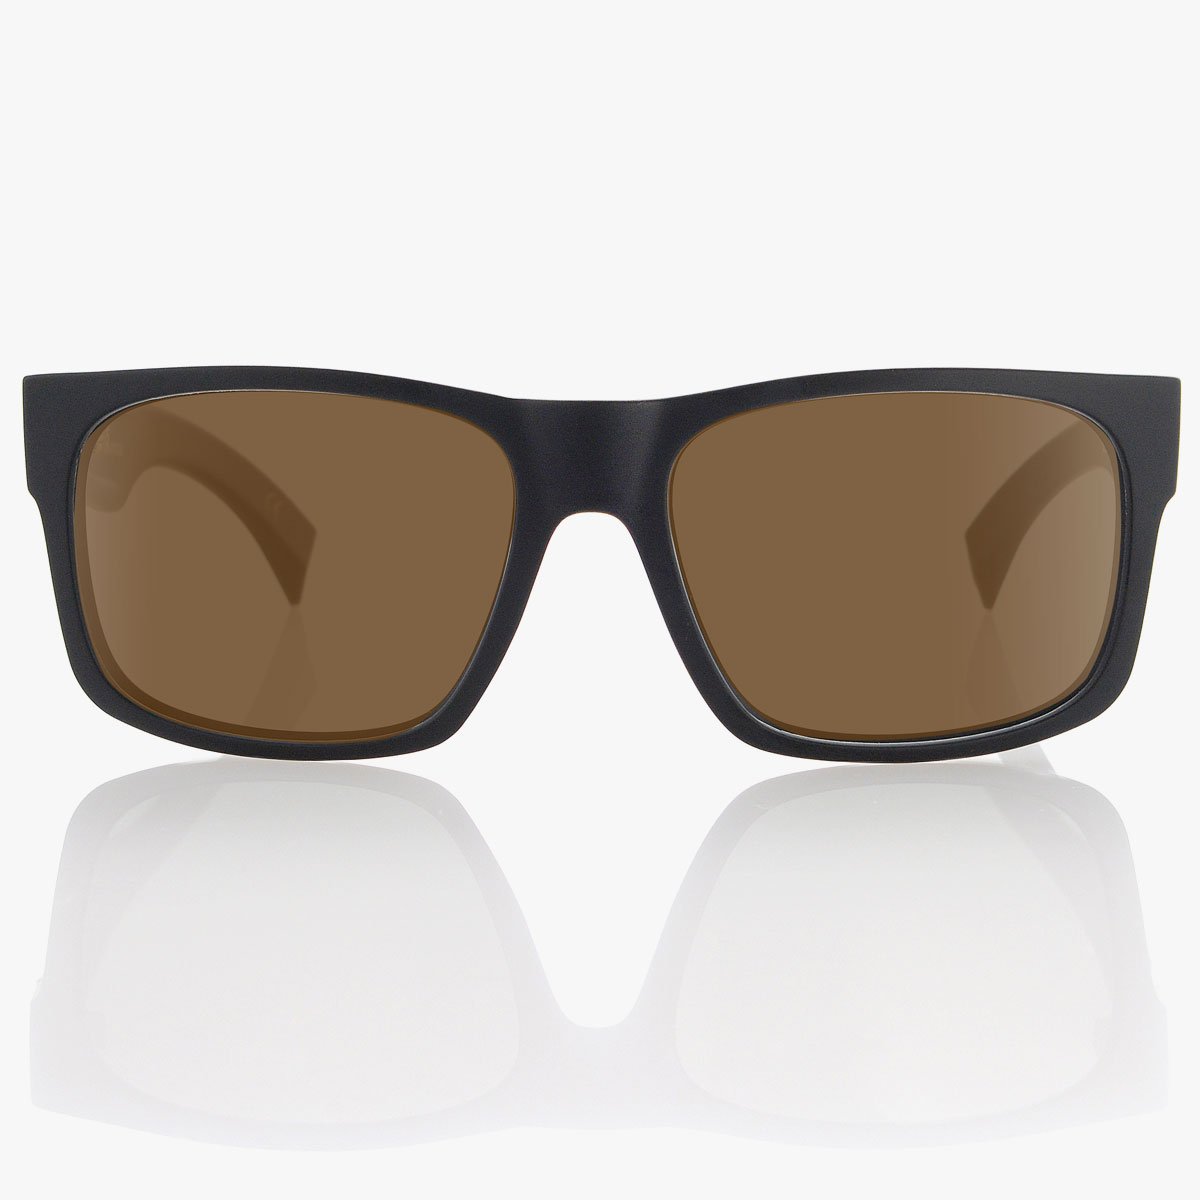 madson sunglasses for men with big heads